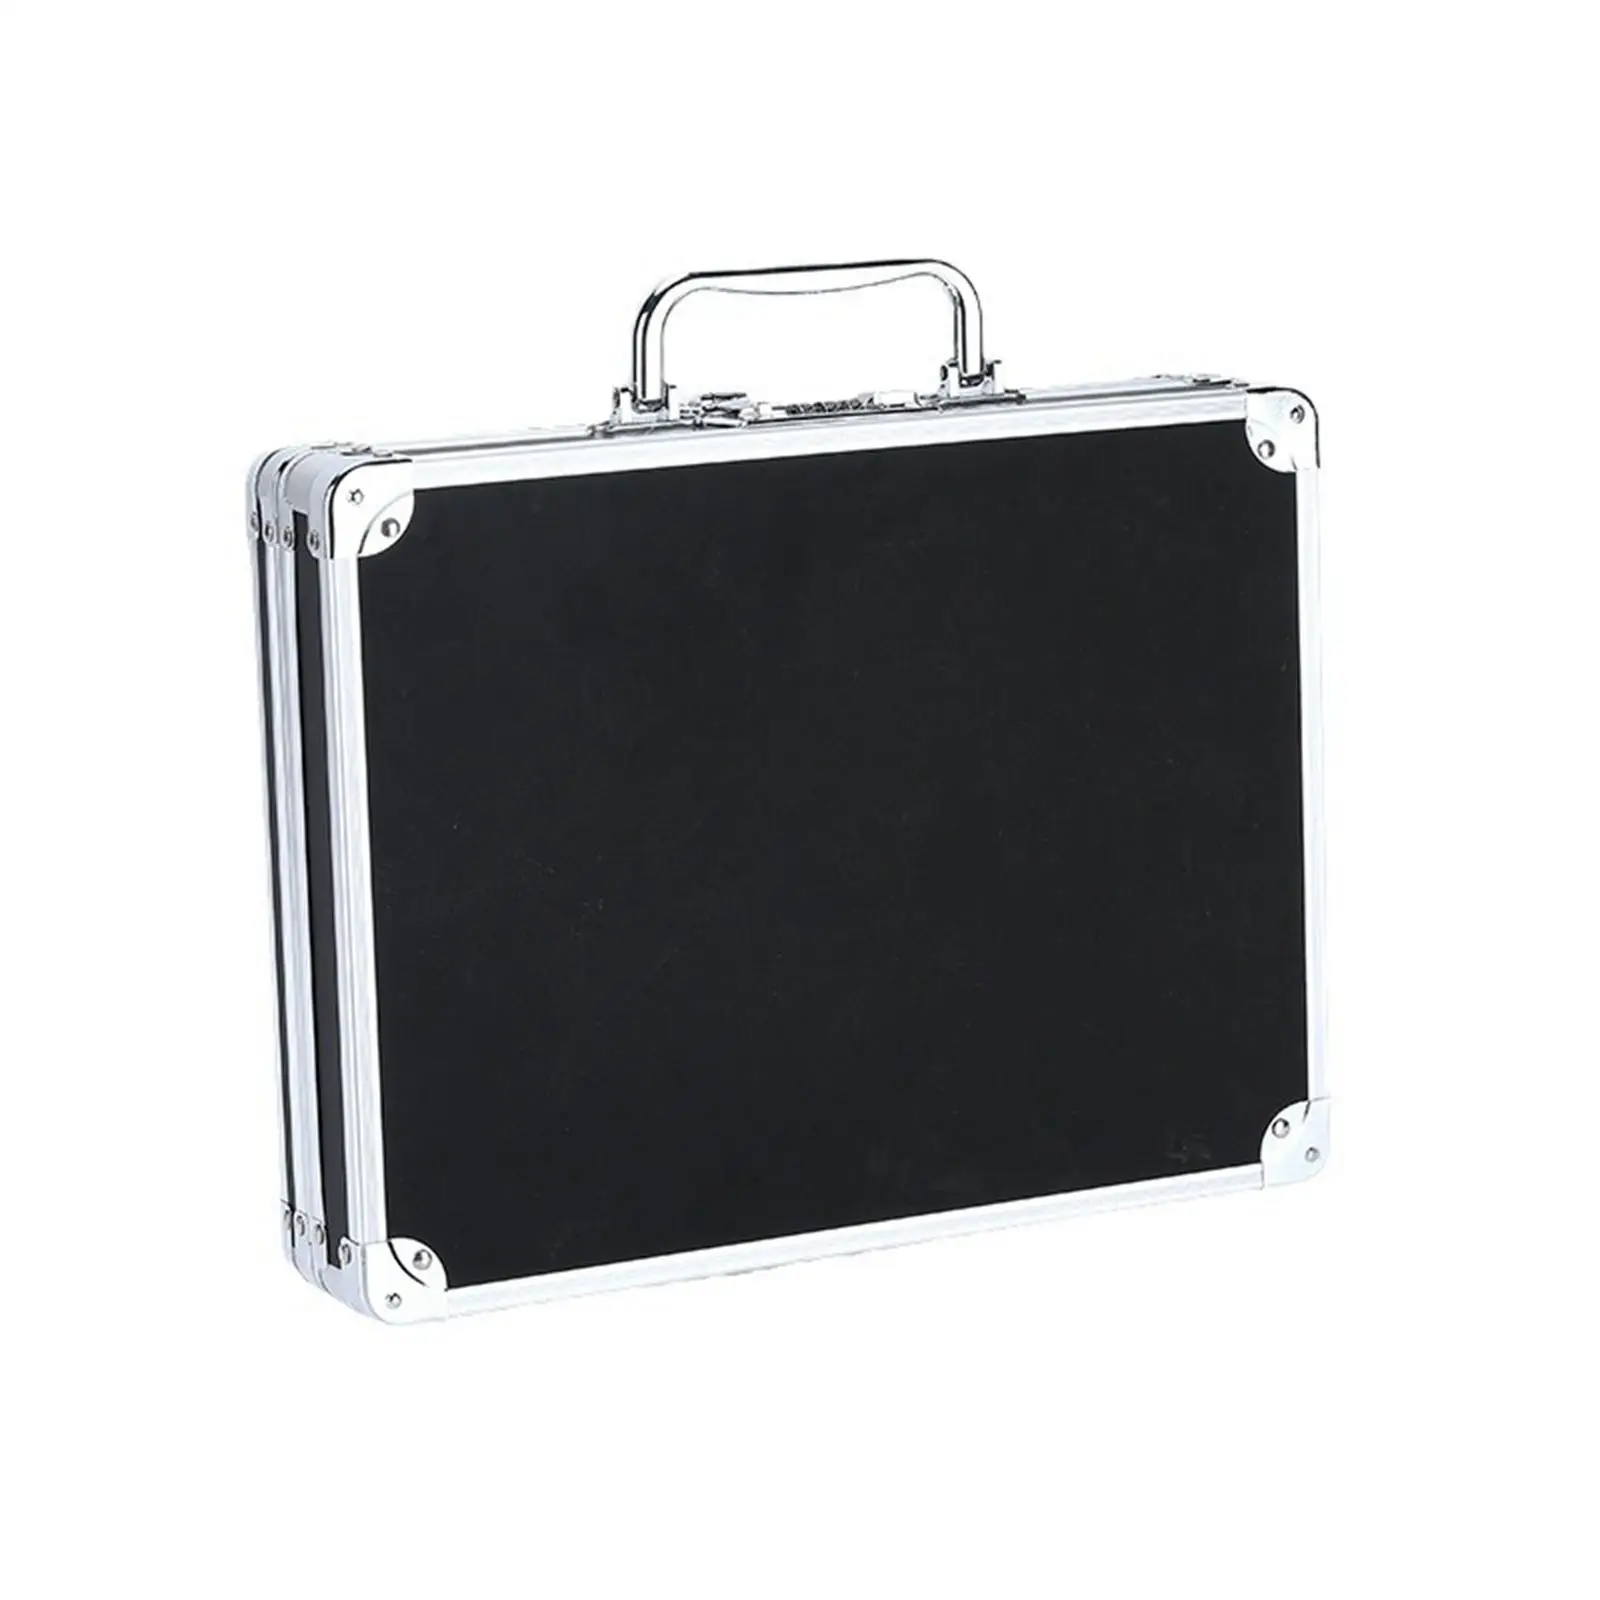 Aluminum Hard Case Aluminum Alloy Storage Case for Electronic Tools Storage Test Instruments Cameras Tools Parts and Accessories